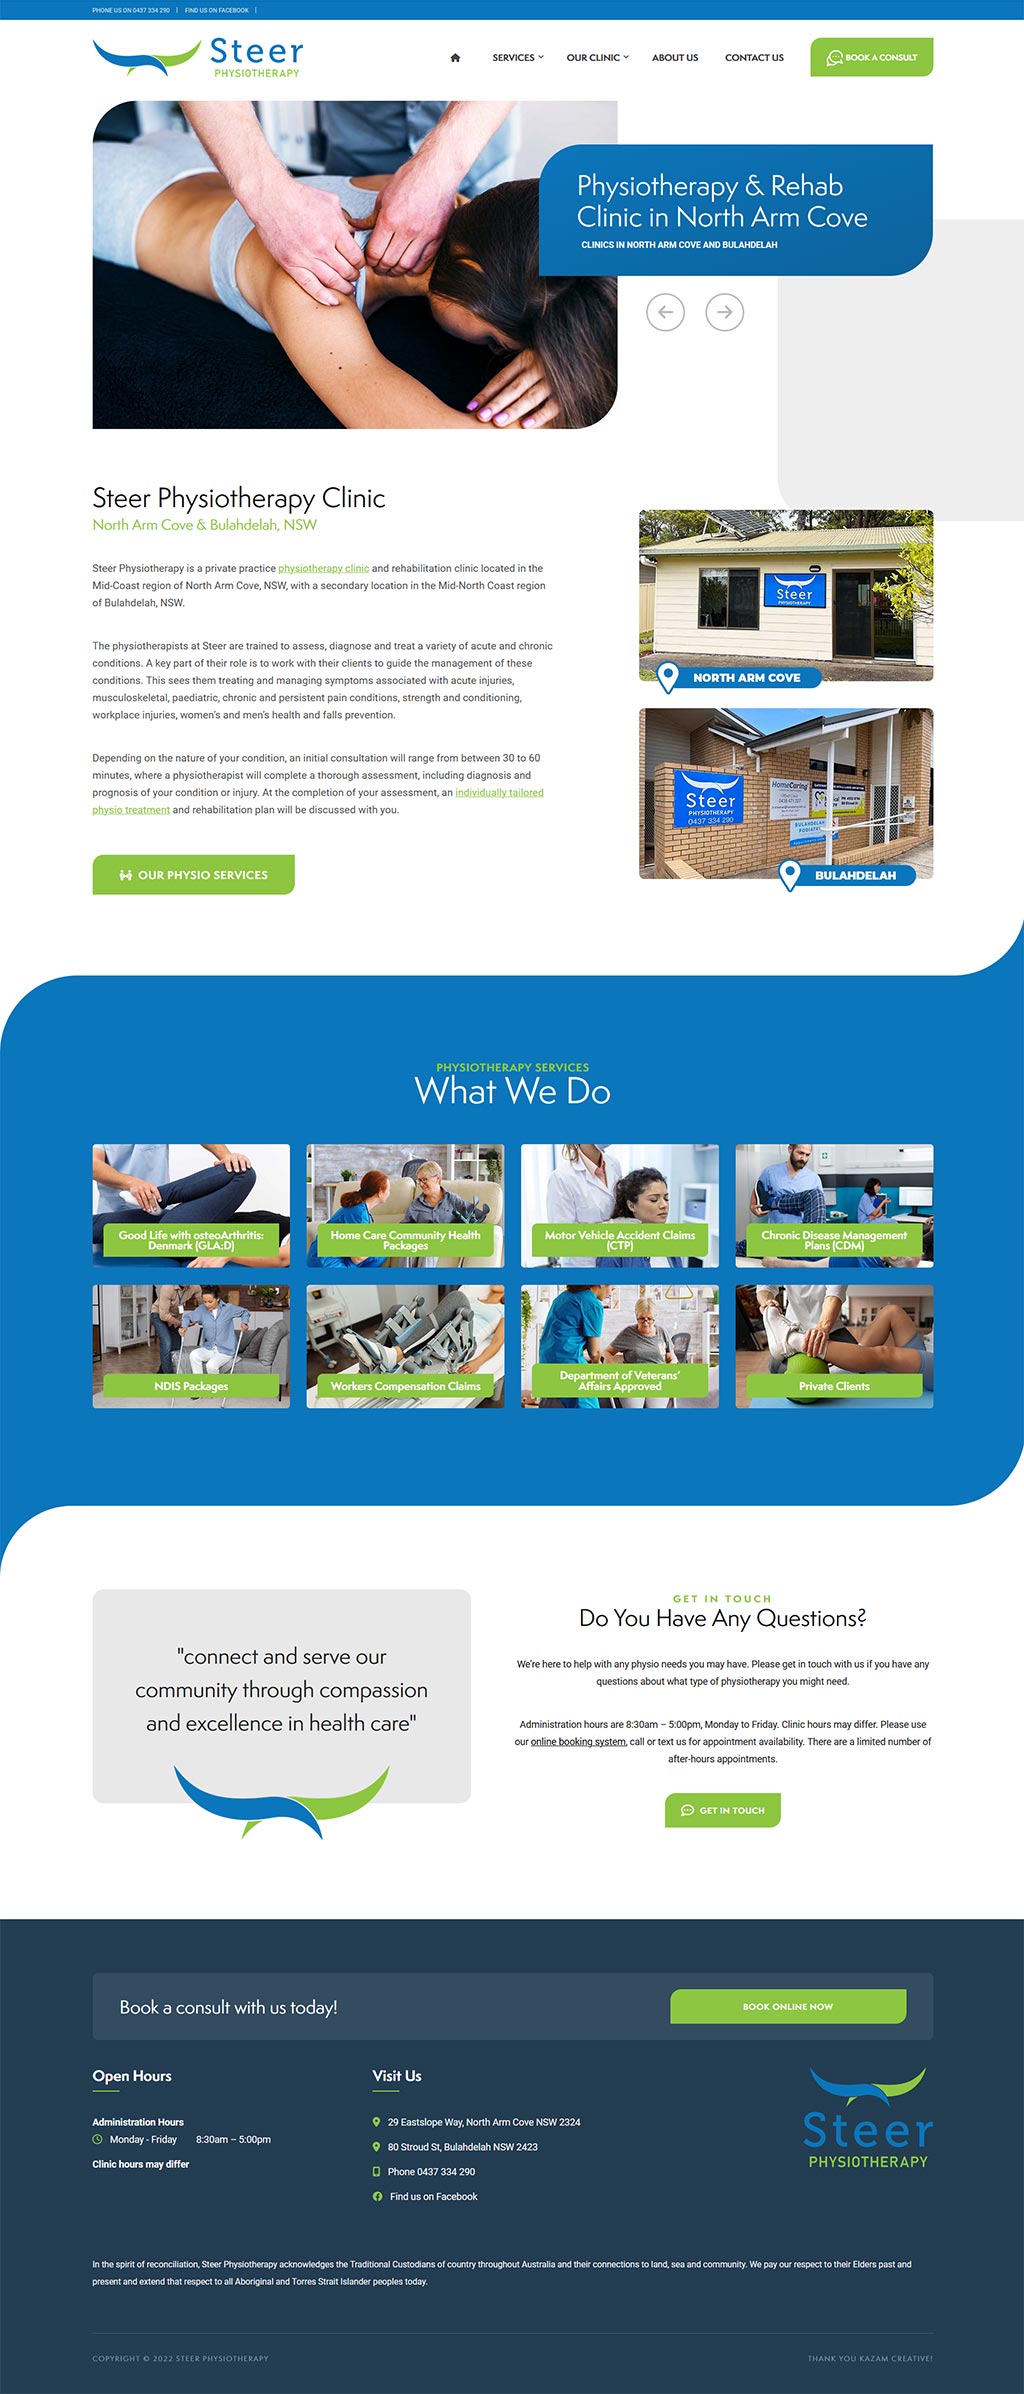 Website Design Client - Steer Physiotherapy